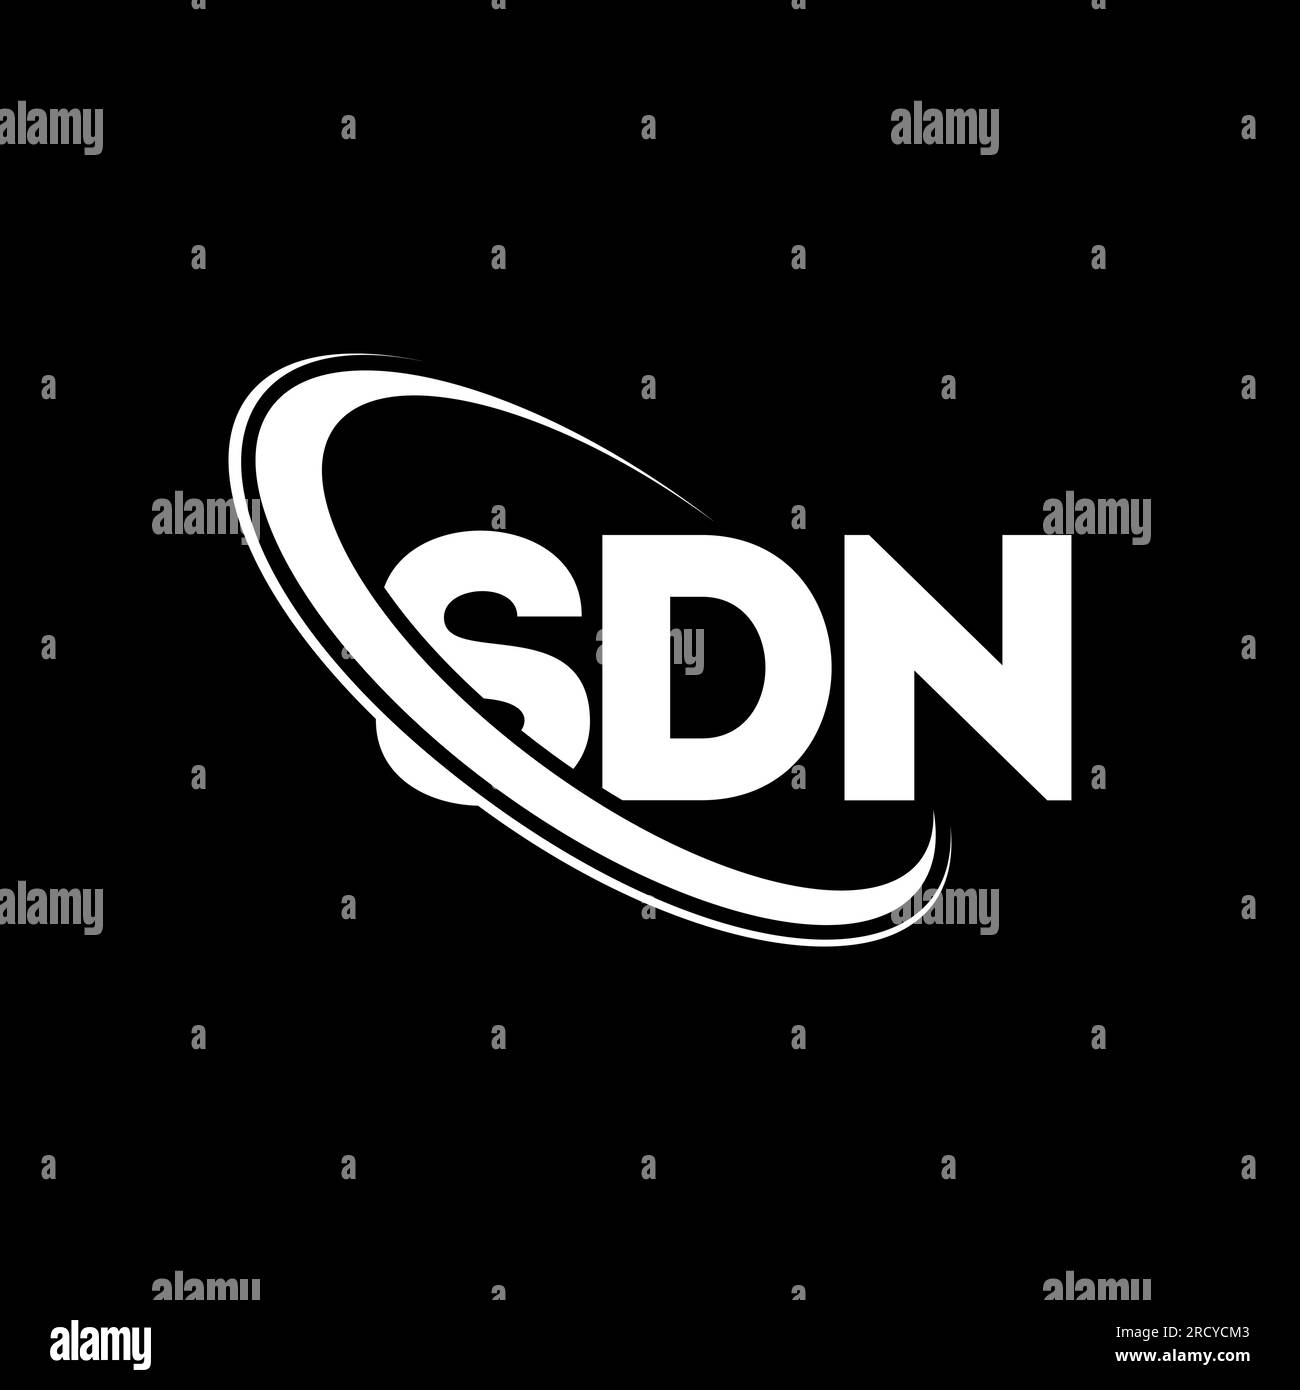 SDN logo. SDN letter. SDN letter logo design. Initials SDN logo linked with circle and uppercase monogram logo. SDN typography for technology, busines Stock Vector